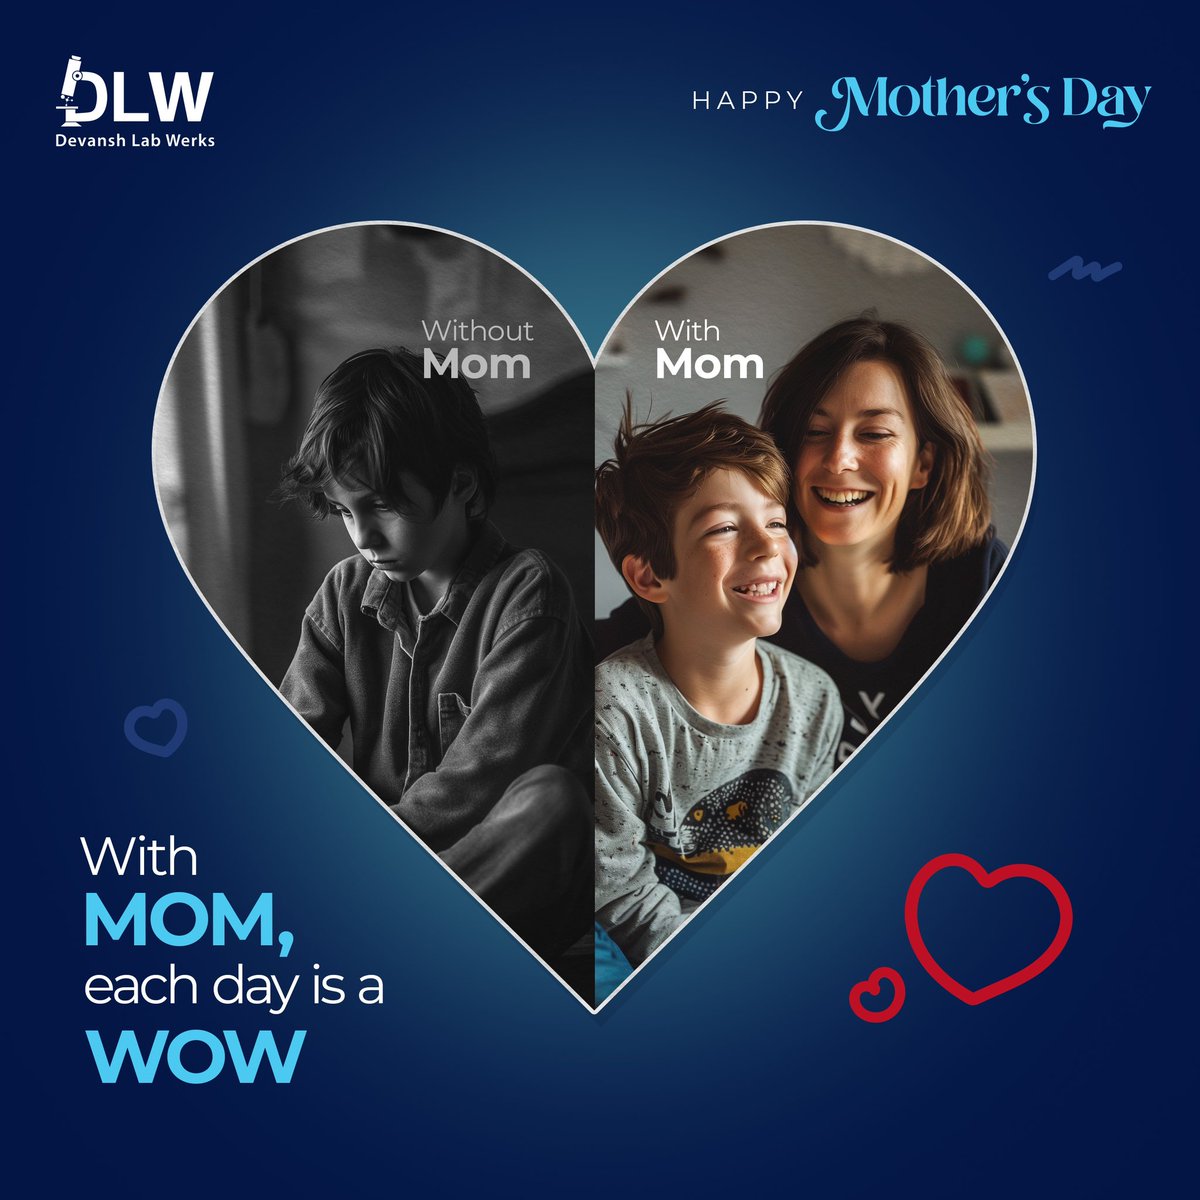 From keeping your room tidy to protecting your health, Just like DLW stands by you, safeguarding your well-being with accurate diagnostics. Happy Mother’s Day to all the incredible moms! 

#DLW #DevanshLabWerks #HappyMothersDay #MomsHealth #HealthyMom #Alabama #USA #Dallas #Texas